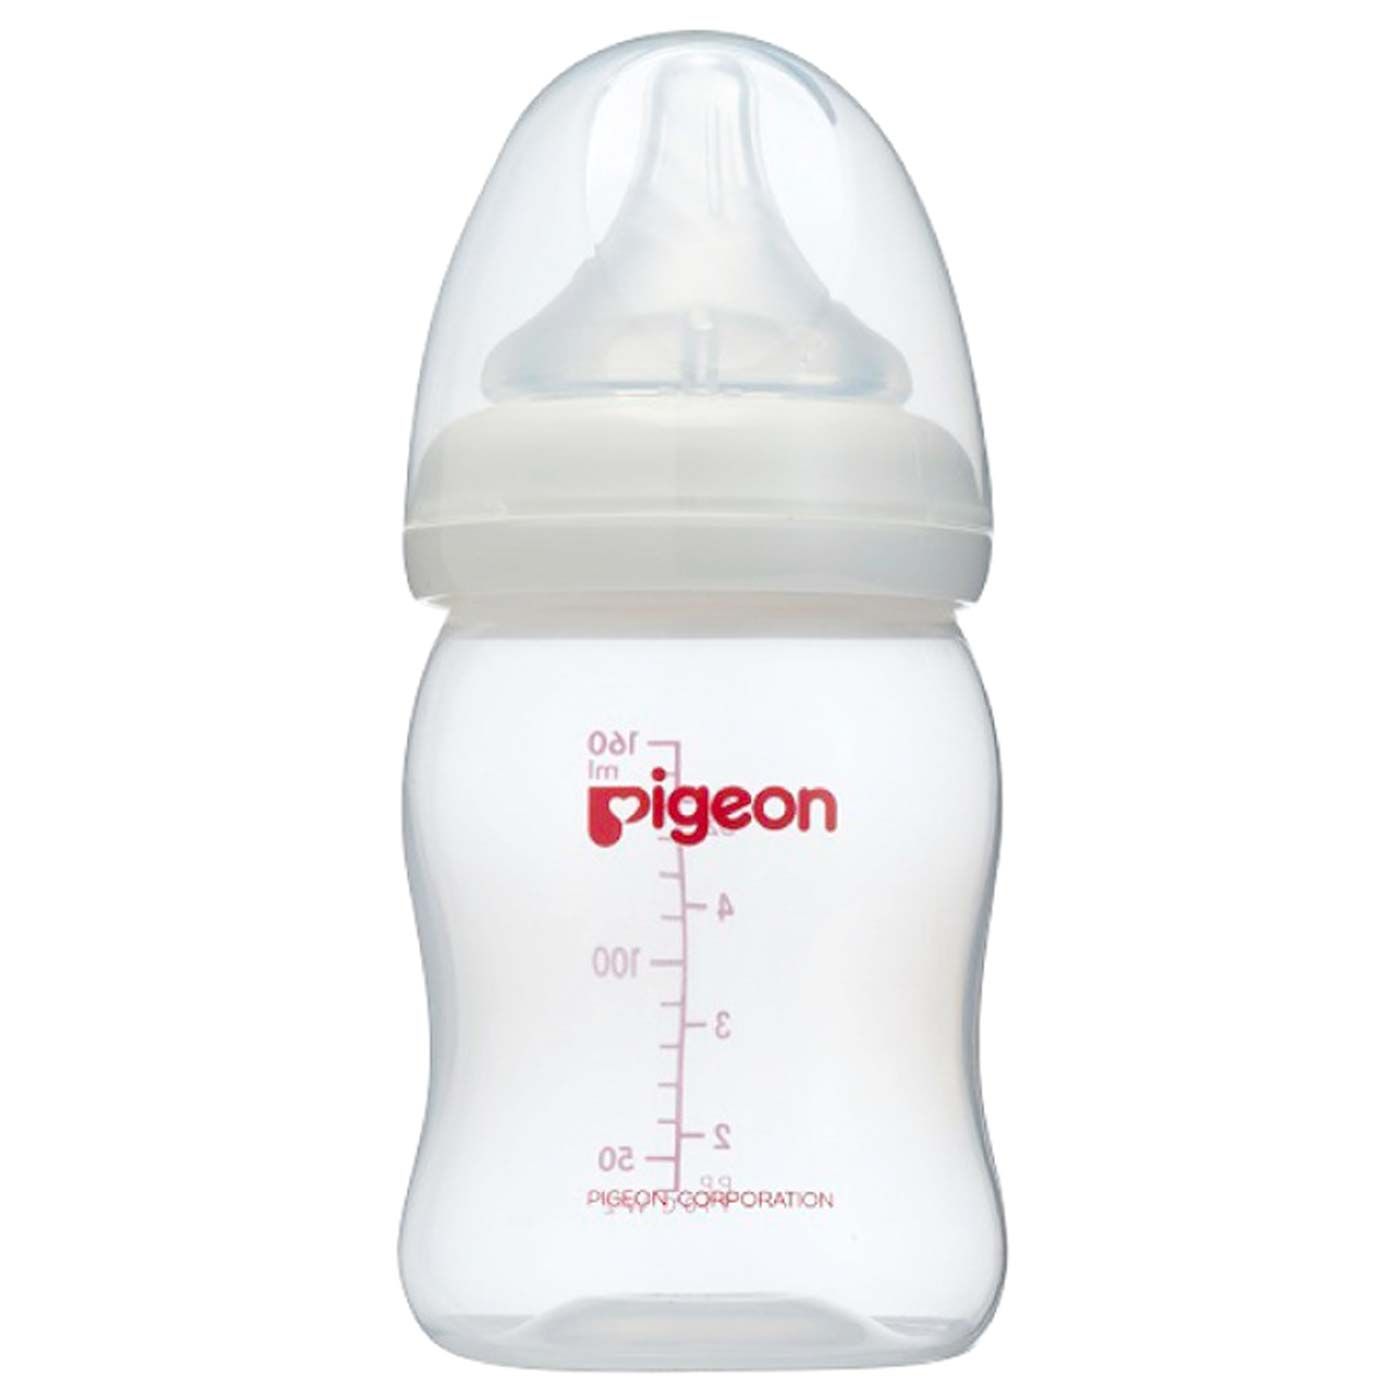 Pigeon Botol PP Wide Neck 160 Ml with P-Plus Nipple White - 1